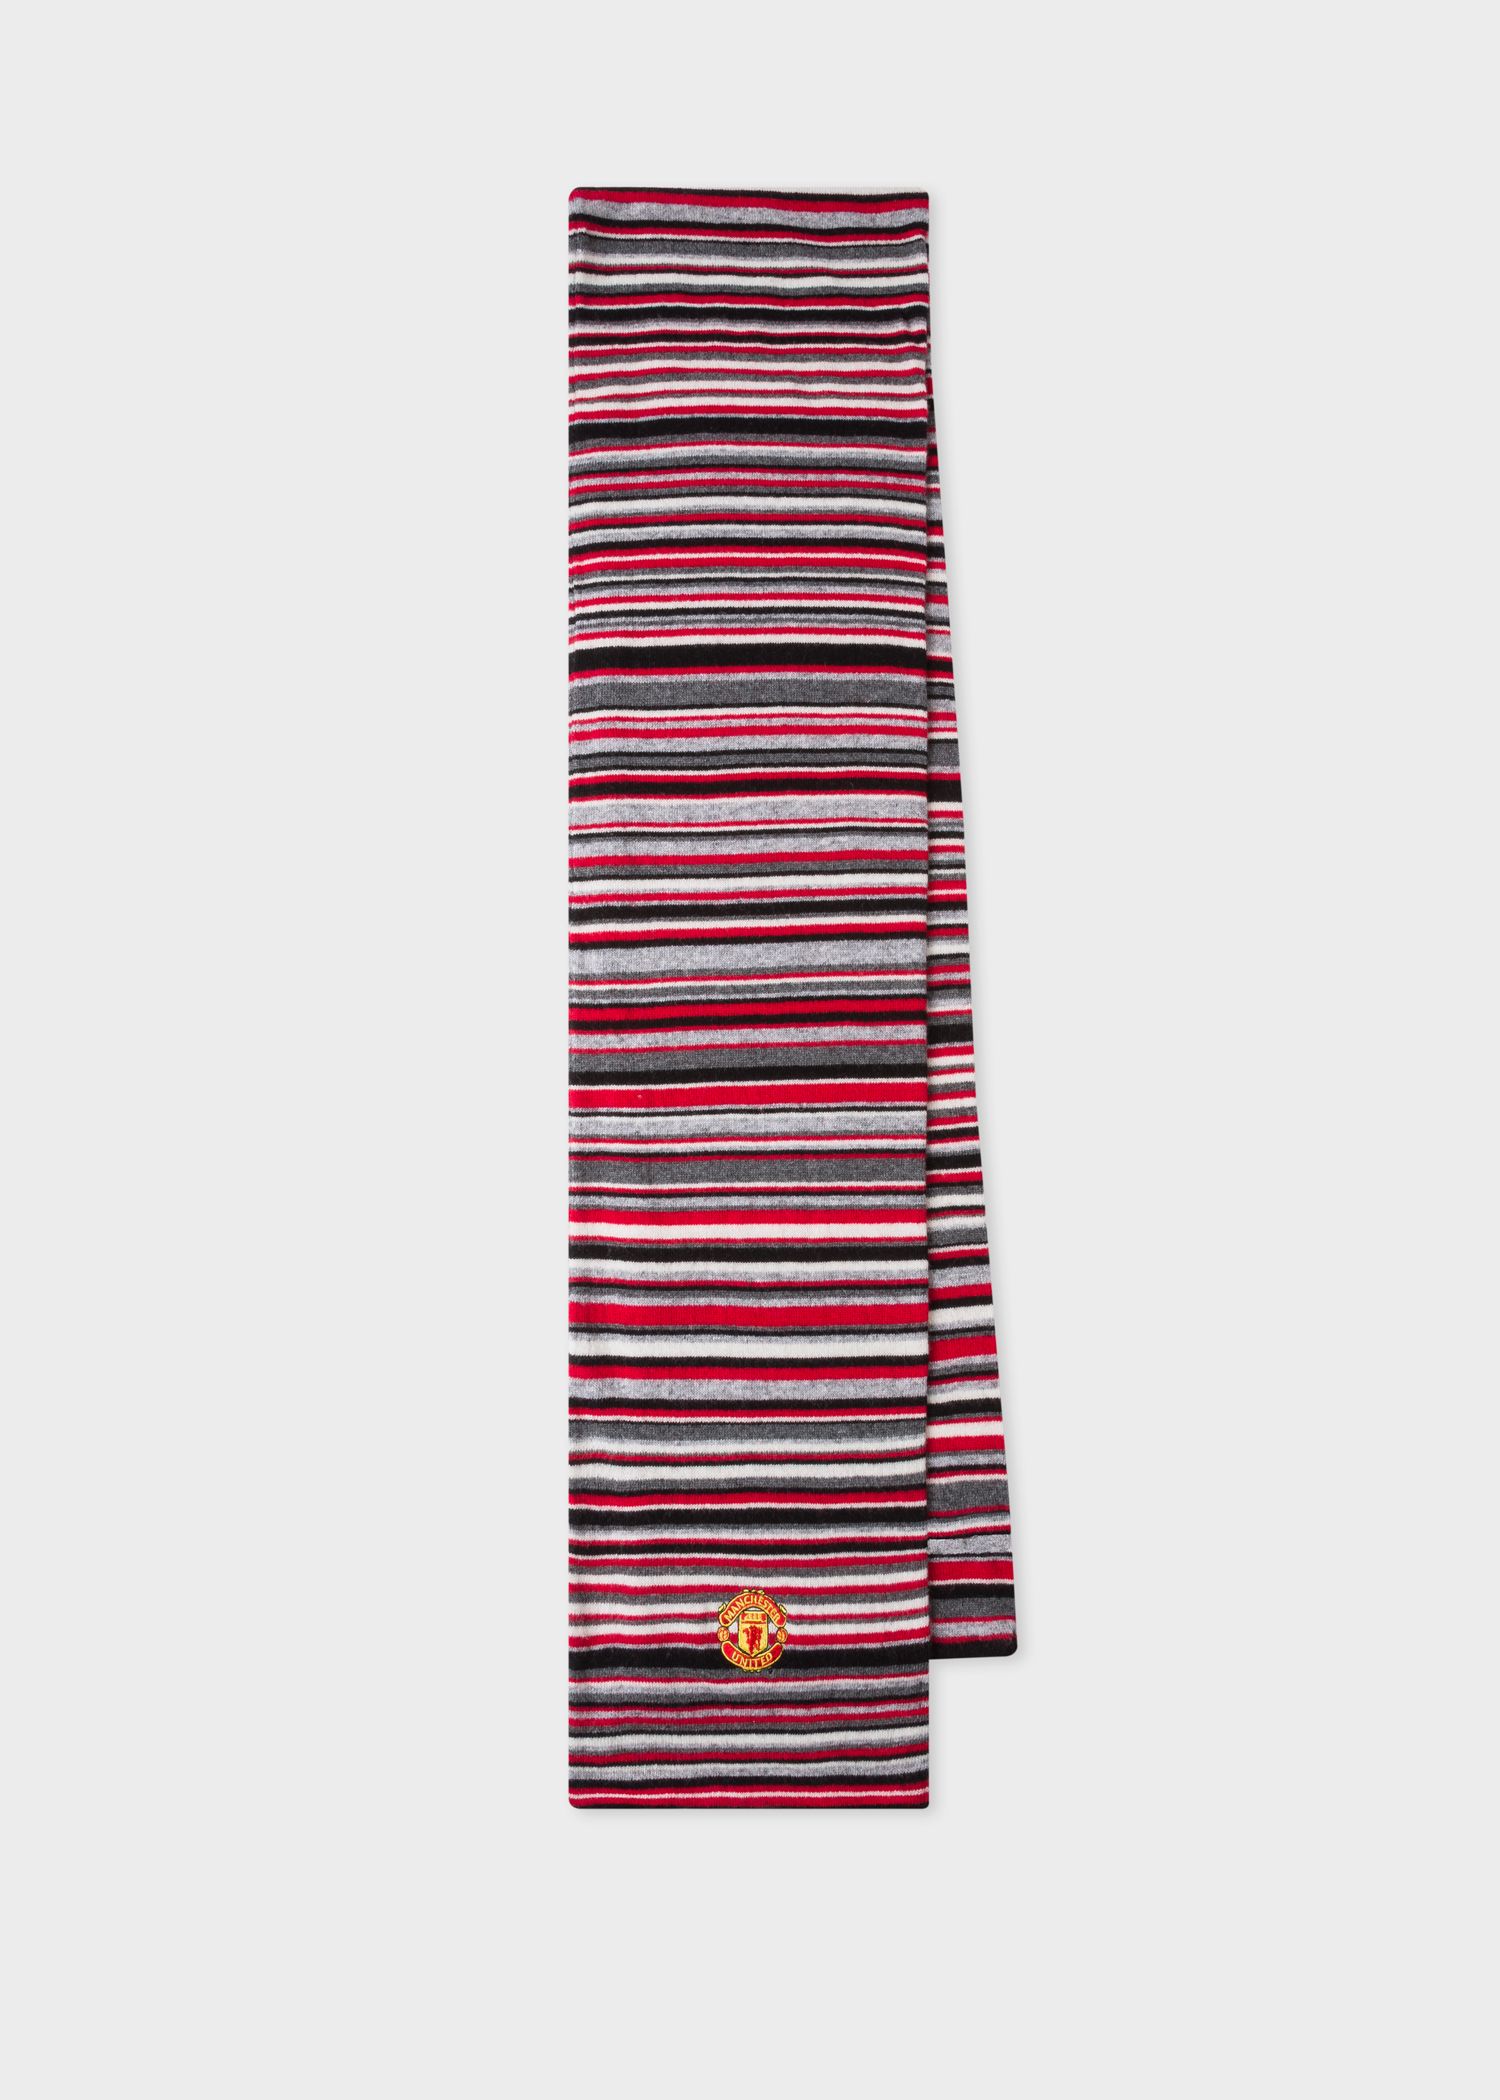 Paul Smith & Manchester United Red Striped WoolCashmere Scarf Paul